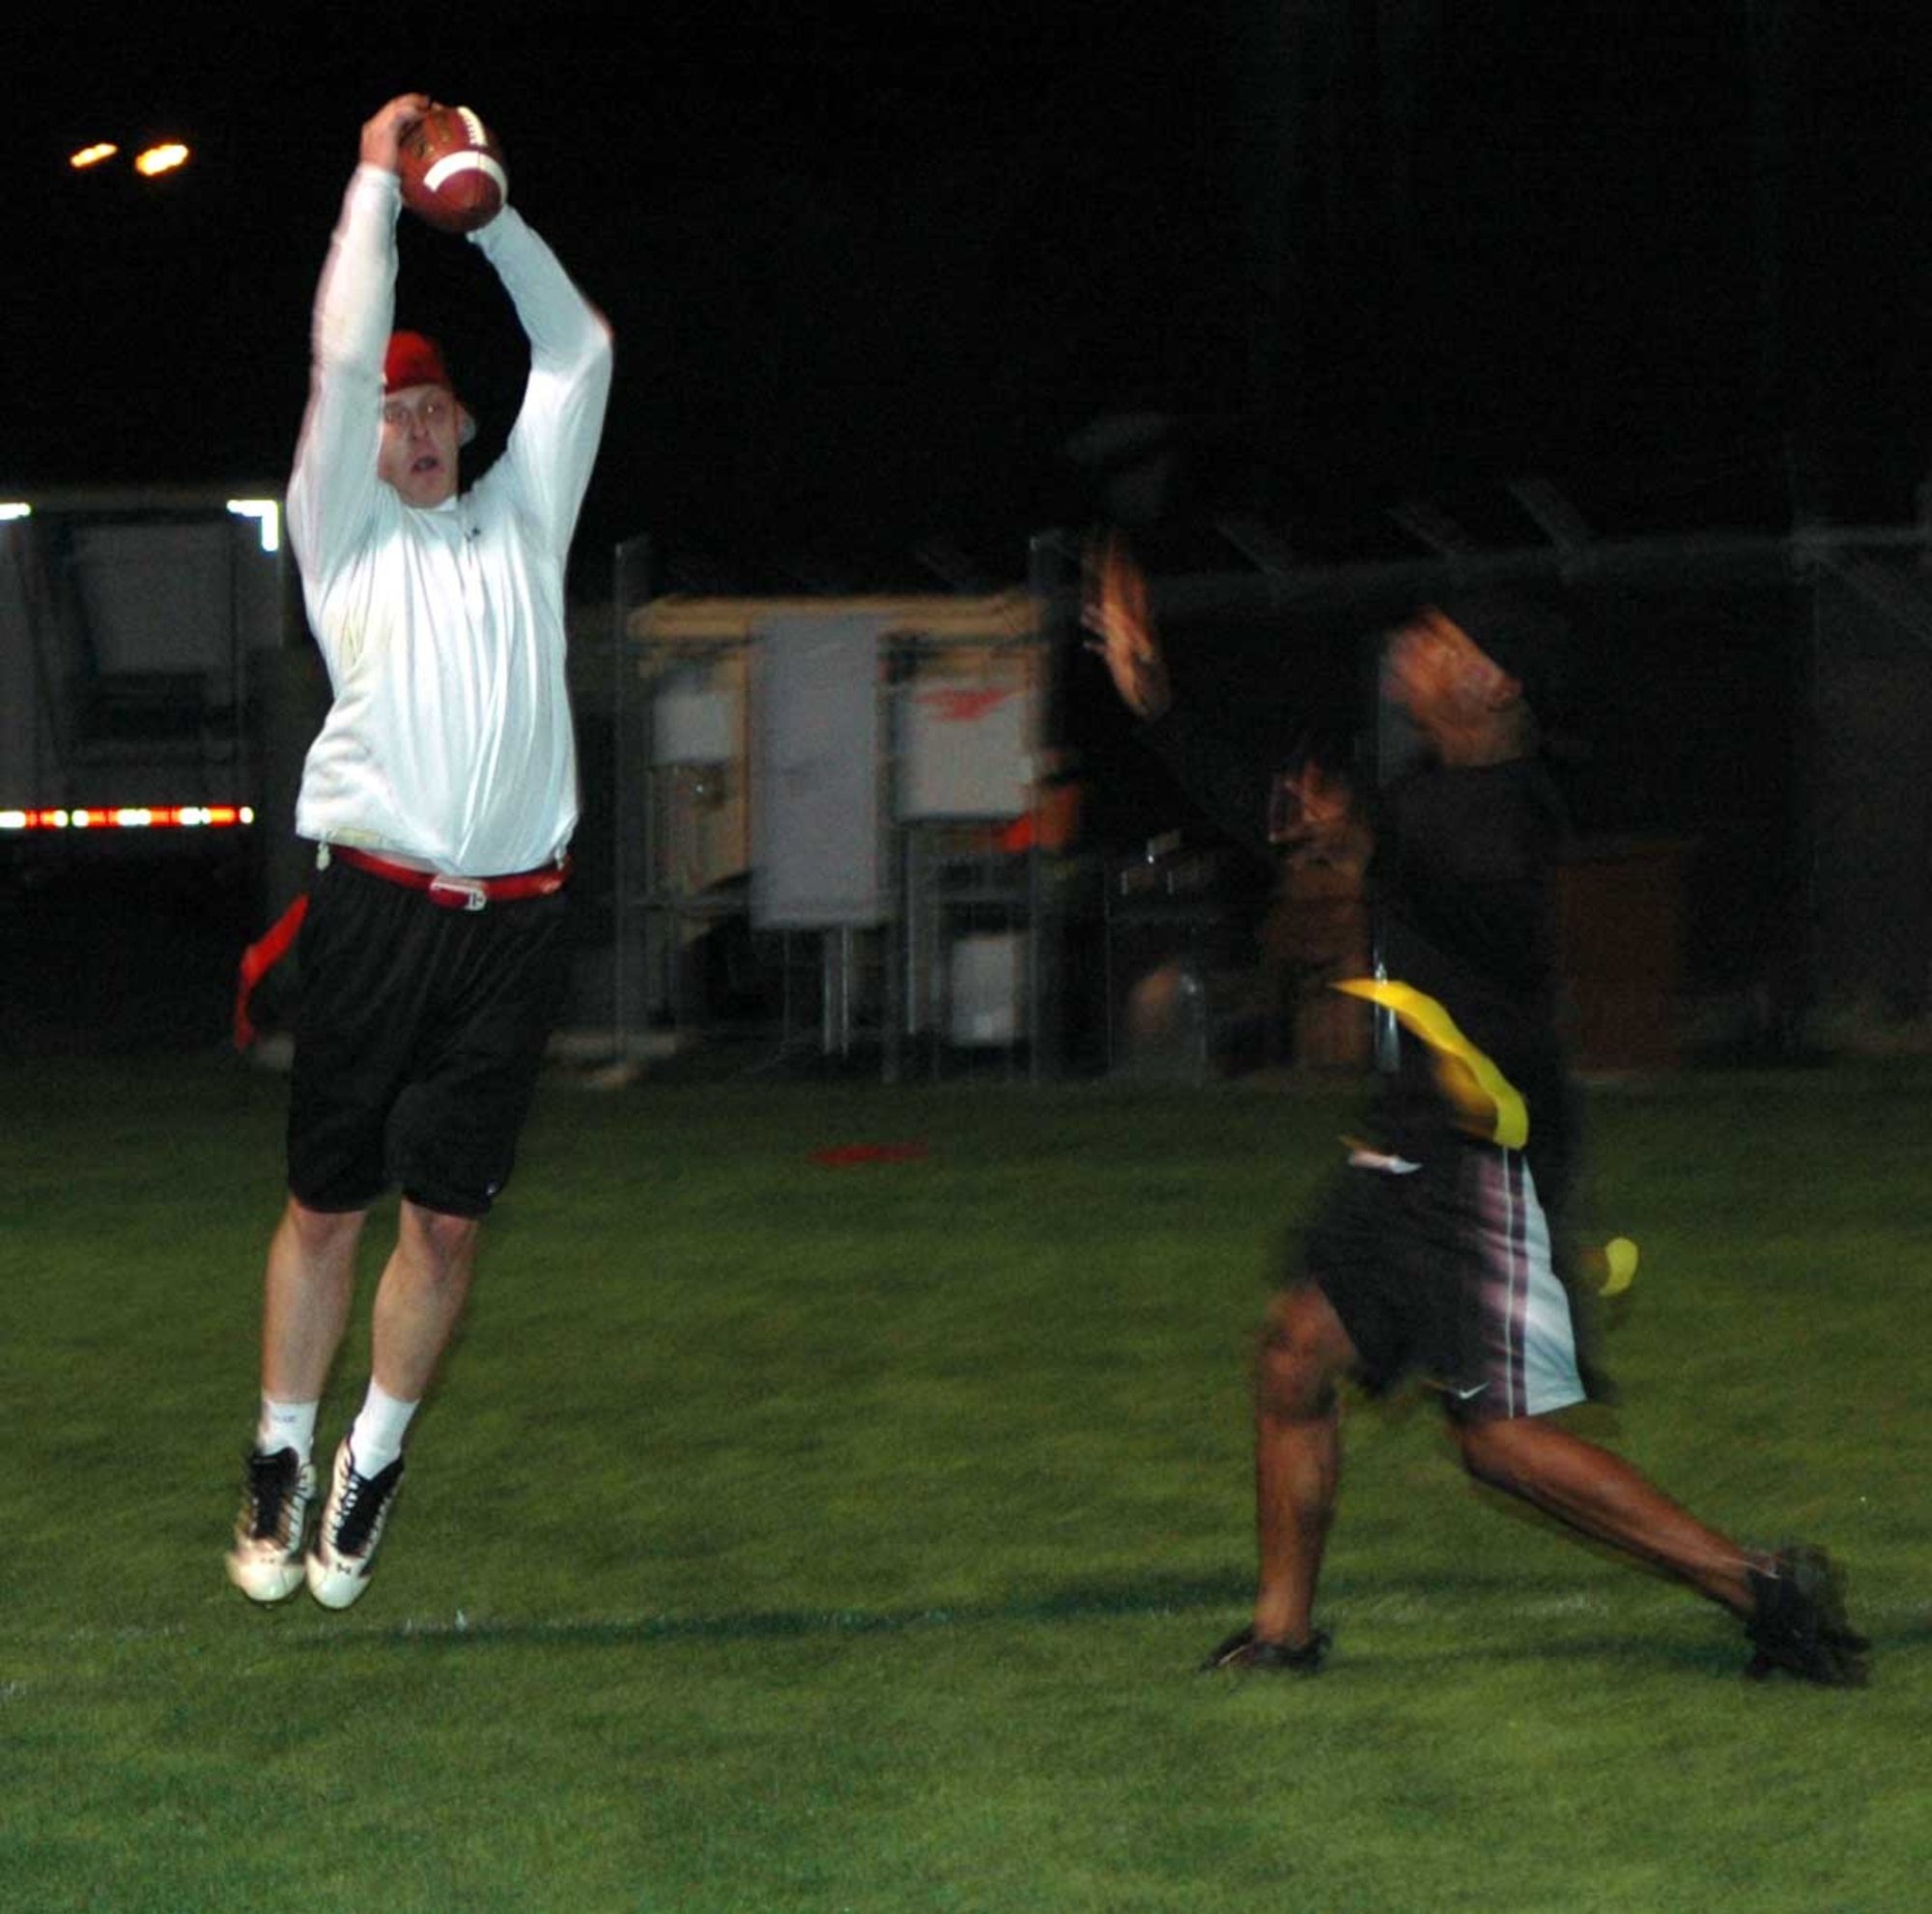 James Wilson, (white shirt), Travis Red All-Stars’ wide receiver, catches a pass over Joseph Harris, Travis Gold All-Stars’ cornerback during the Intramural Flag Football All-Star Classic Nov. 20. The Red All-Stars defeated the Gold All-Stars 14-12. (U.S. Air Force photo/Staff Sgt. Candy Knight)